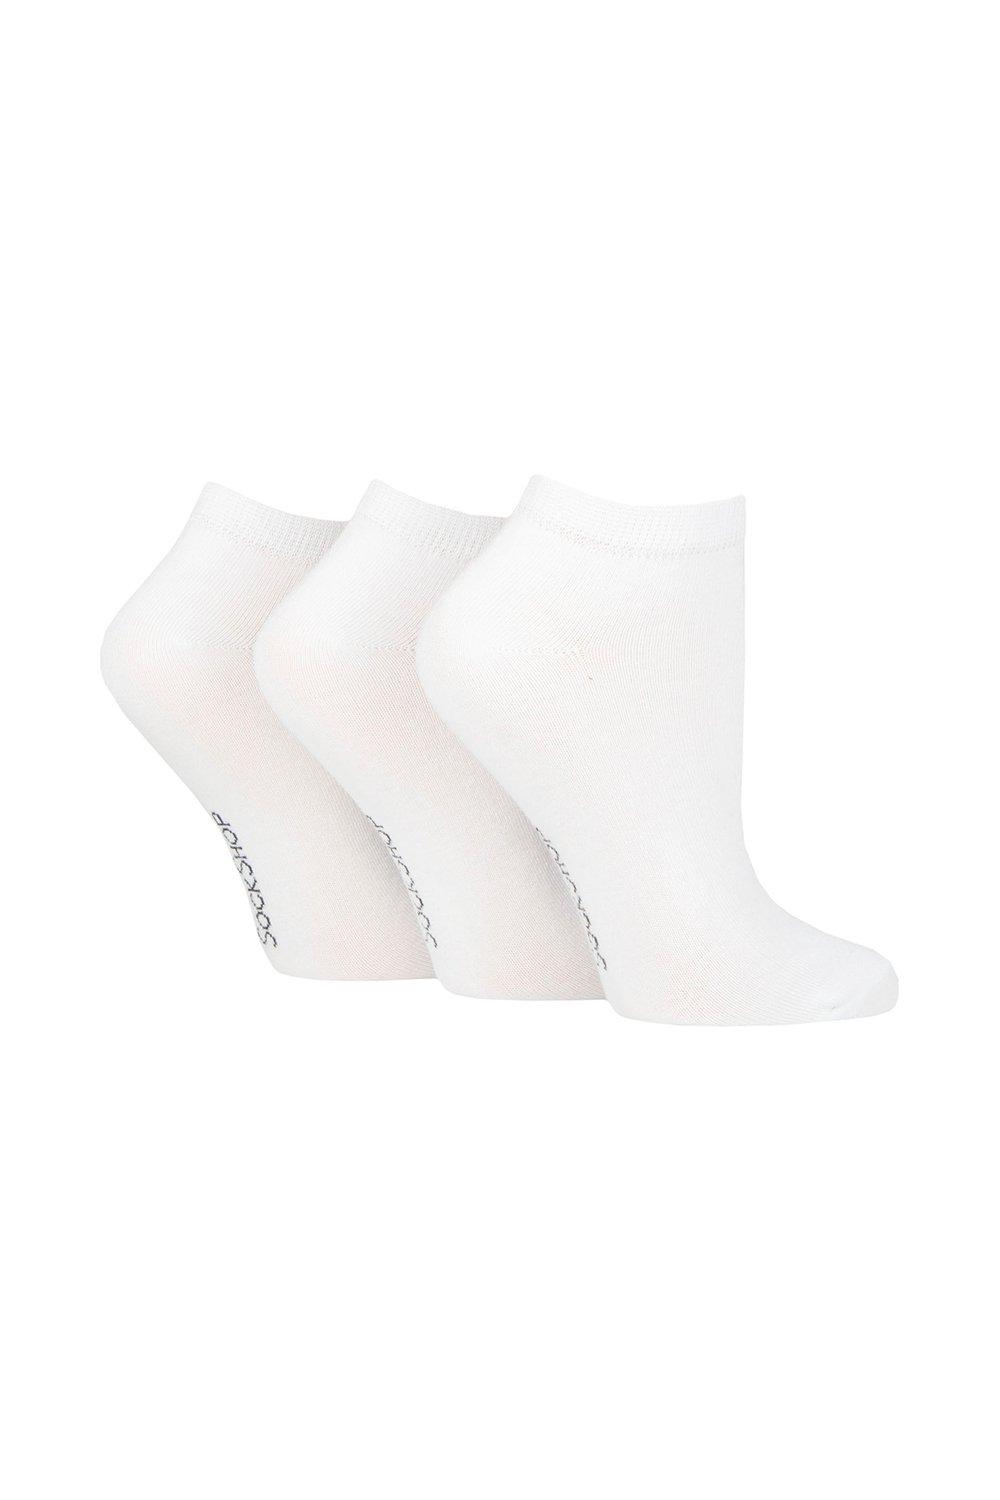 3 Pair Striped, Plain, Ribbed and Mesh Bamboo Trainer Socks